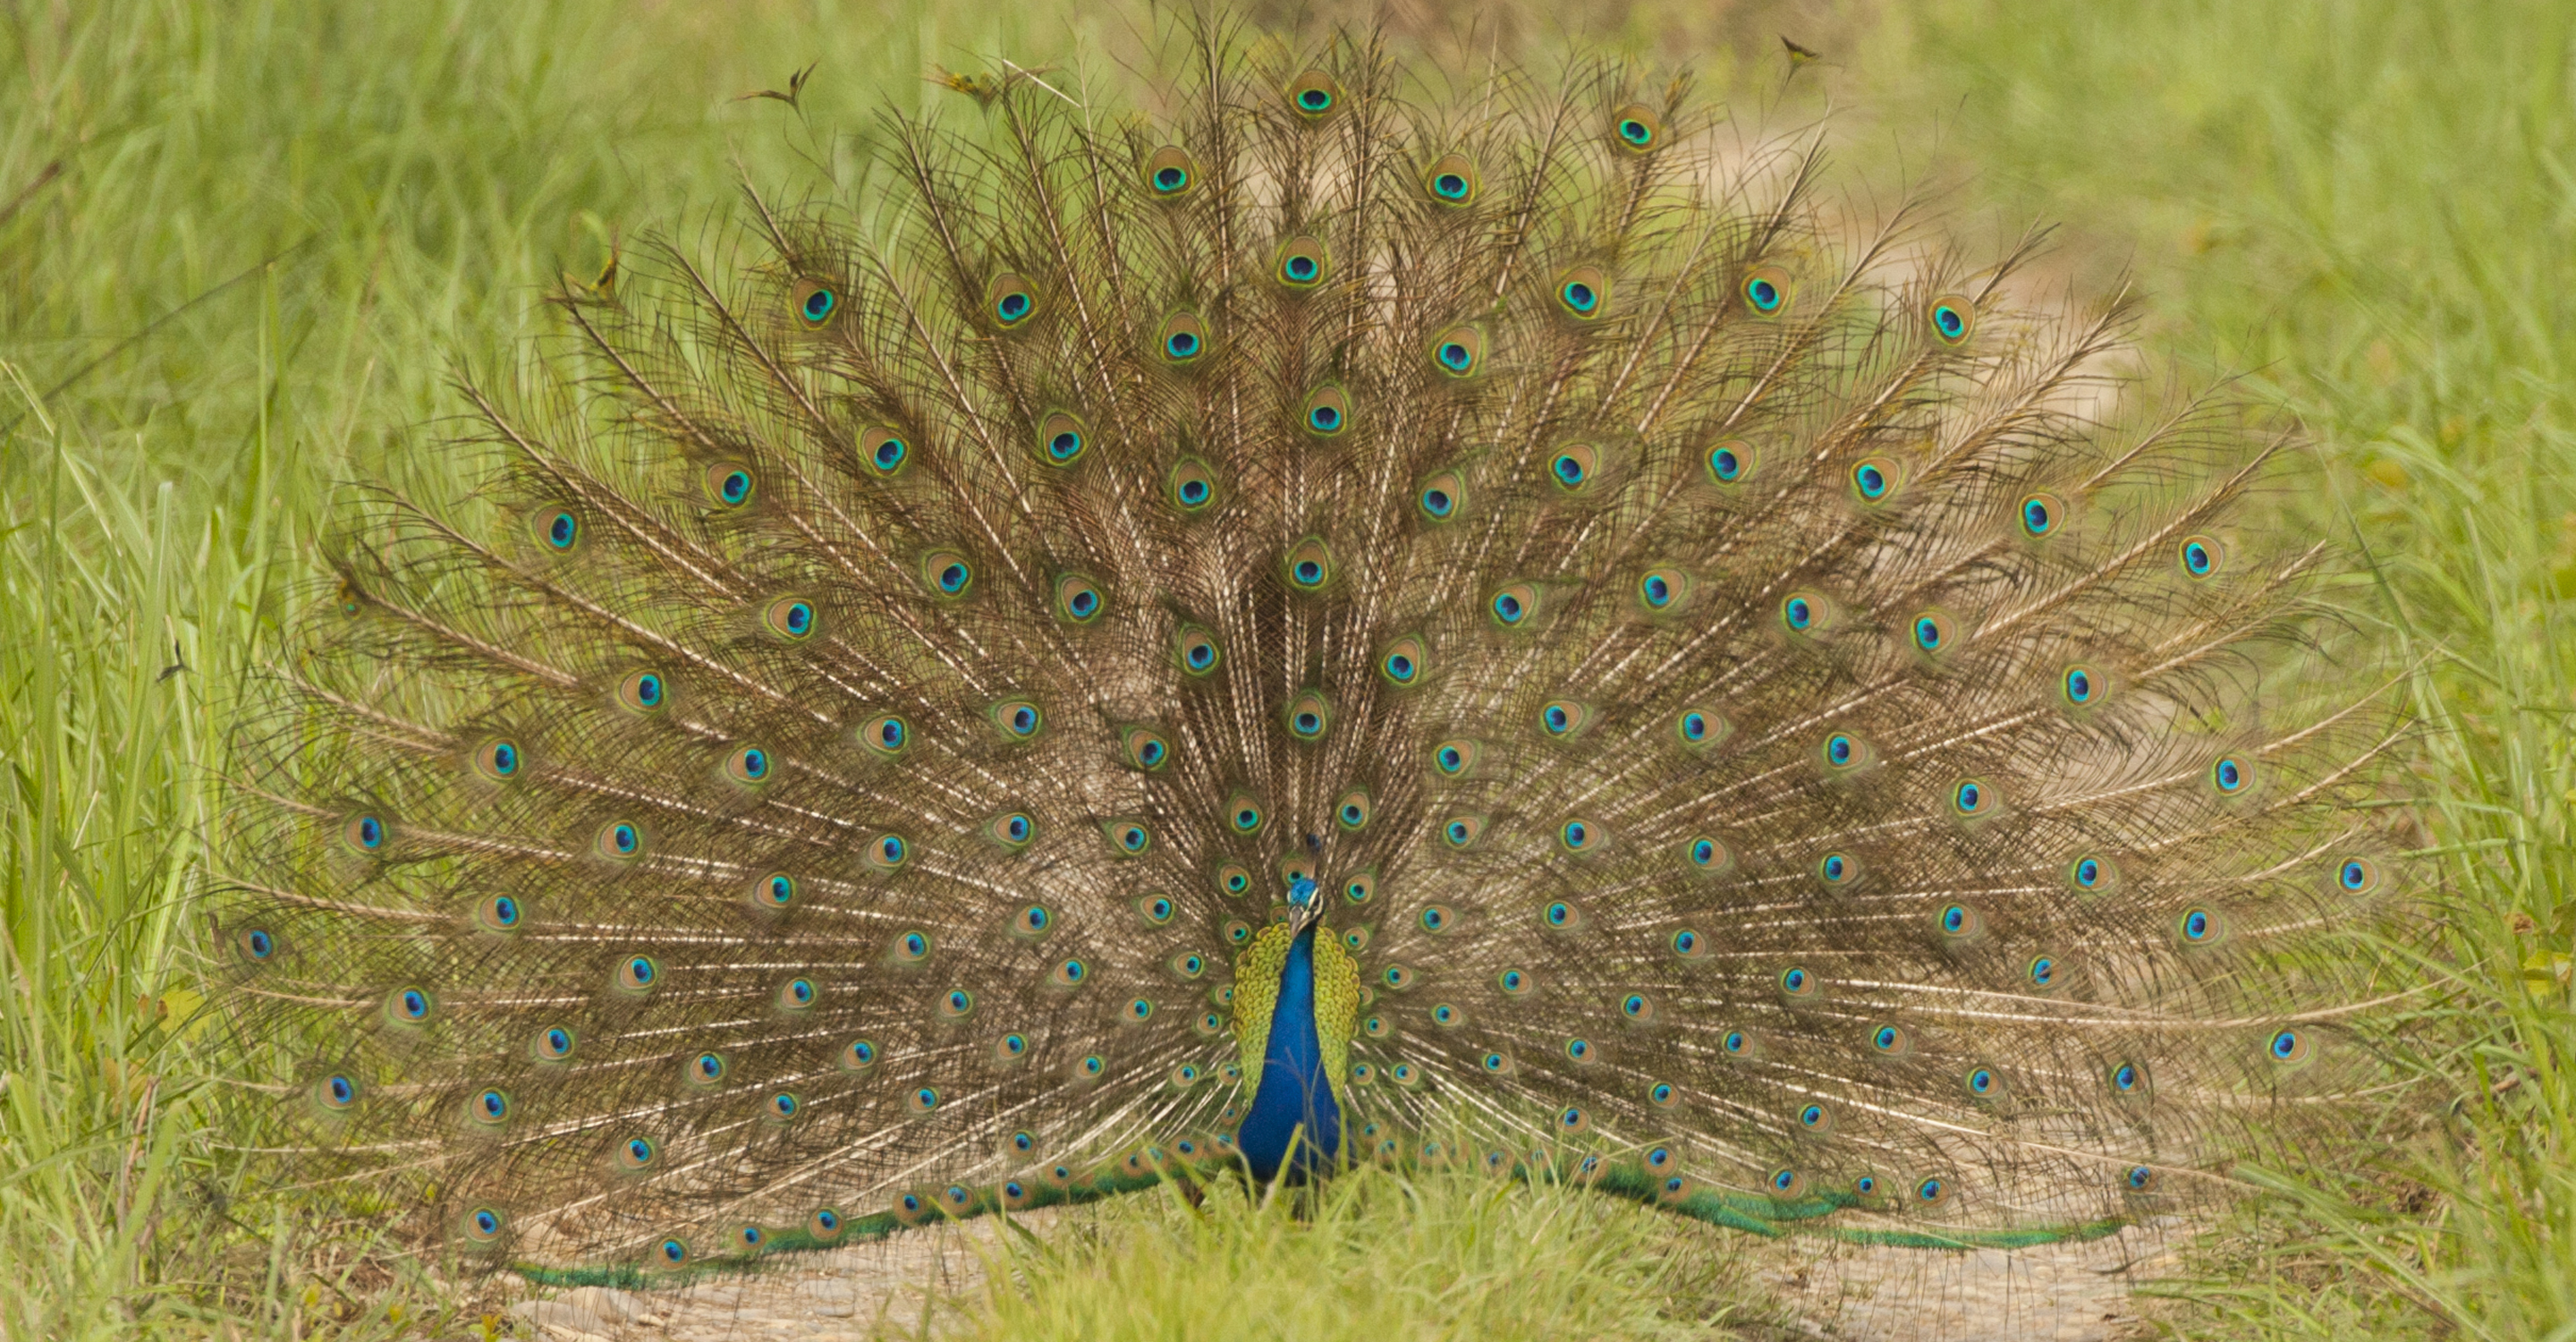 A male peacock displays his large feathered tail during mating season in Bandhavgarh National Park, India